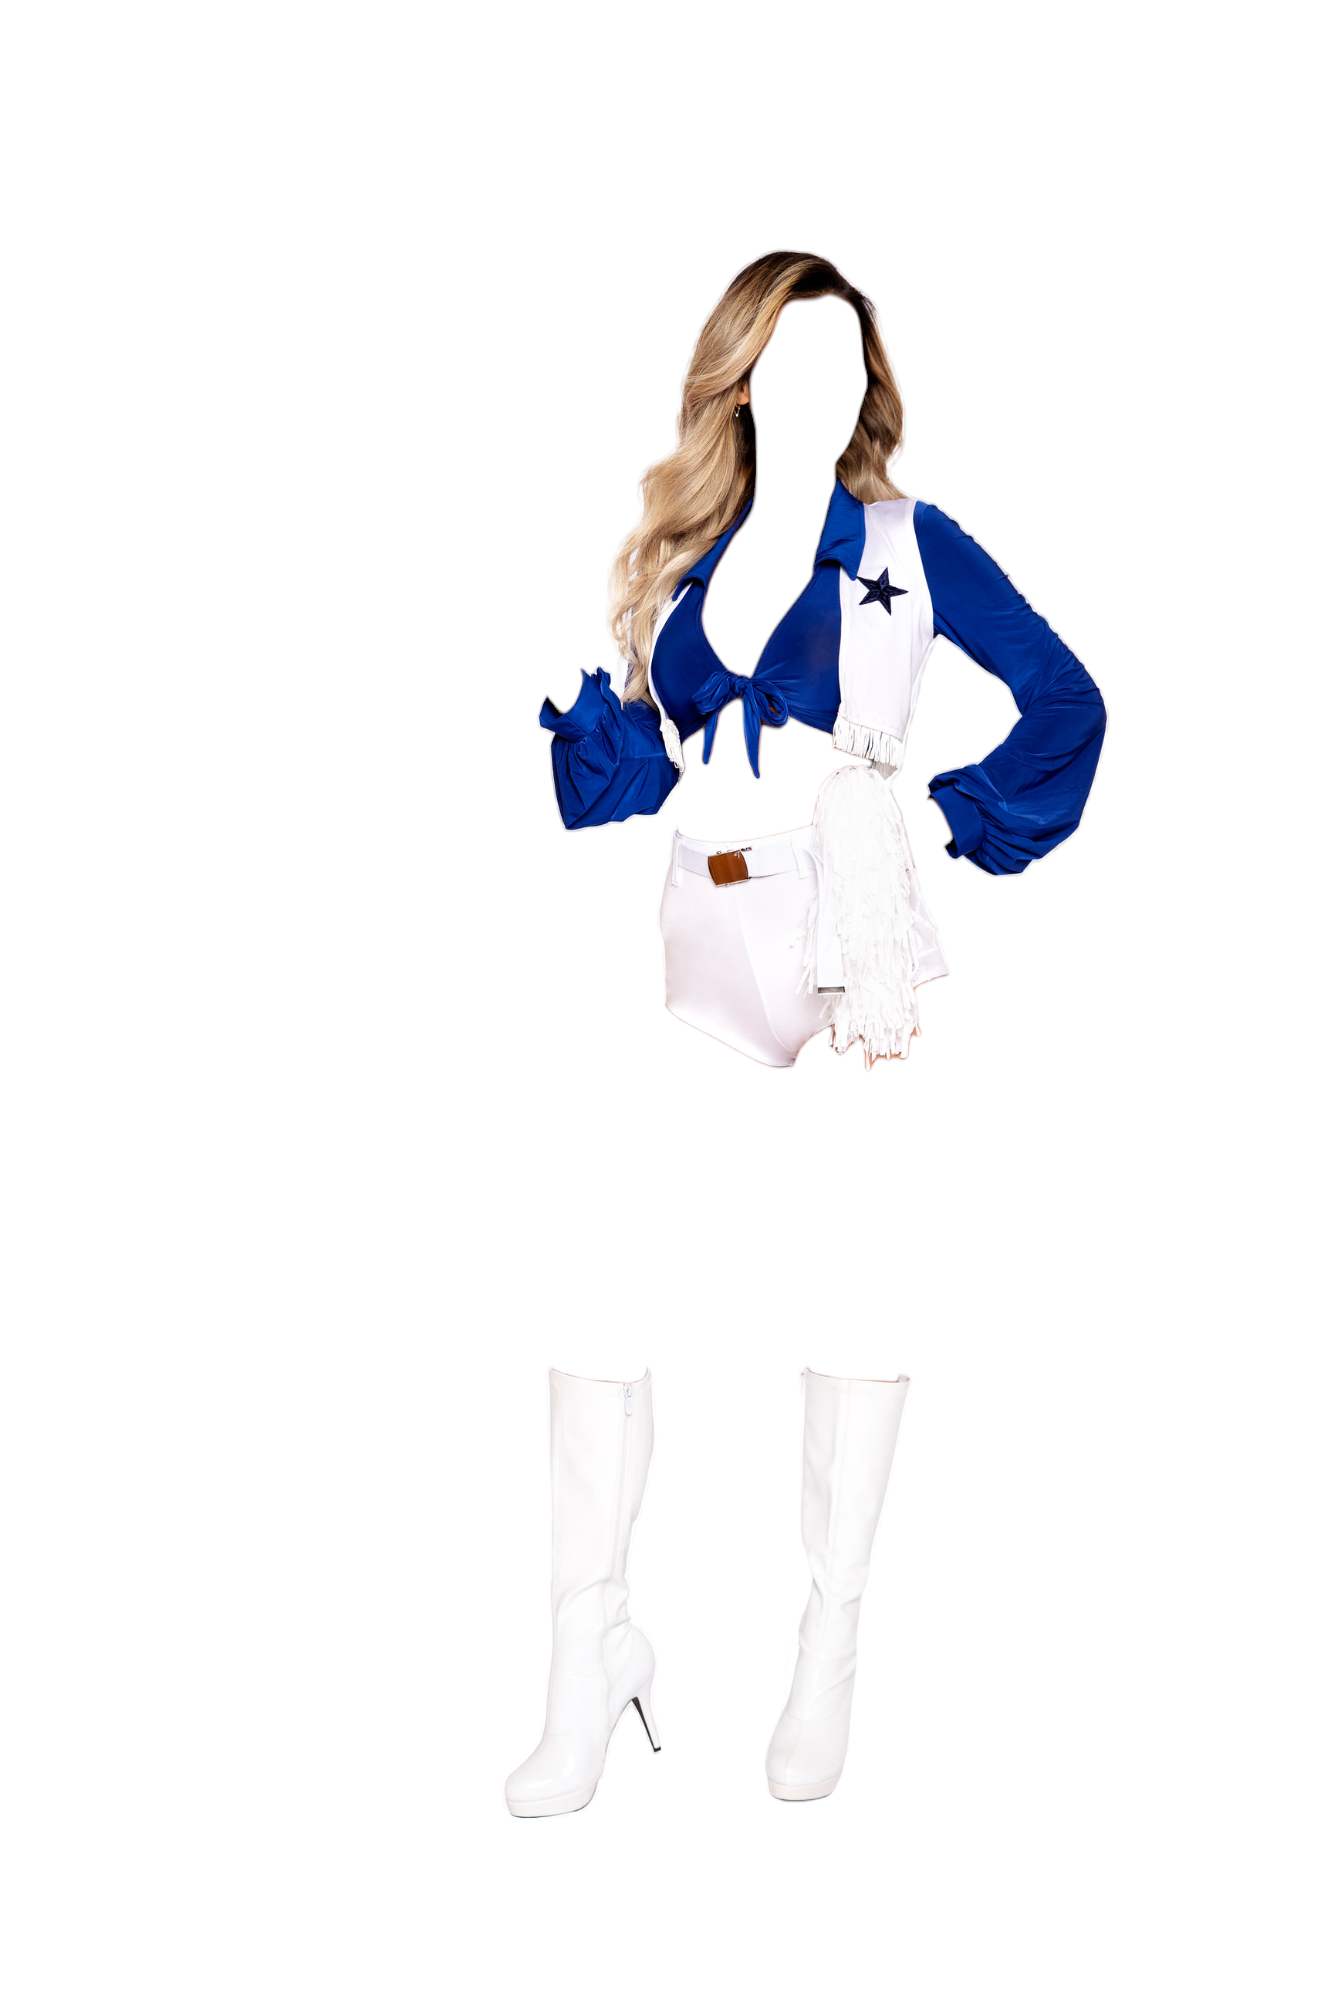 Roma Costume 5 PC Cheerleader Long Sleeve Tie Top with Vest White/Blue